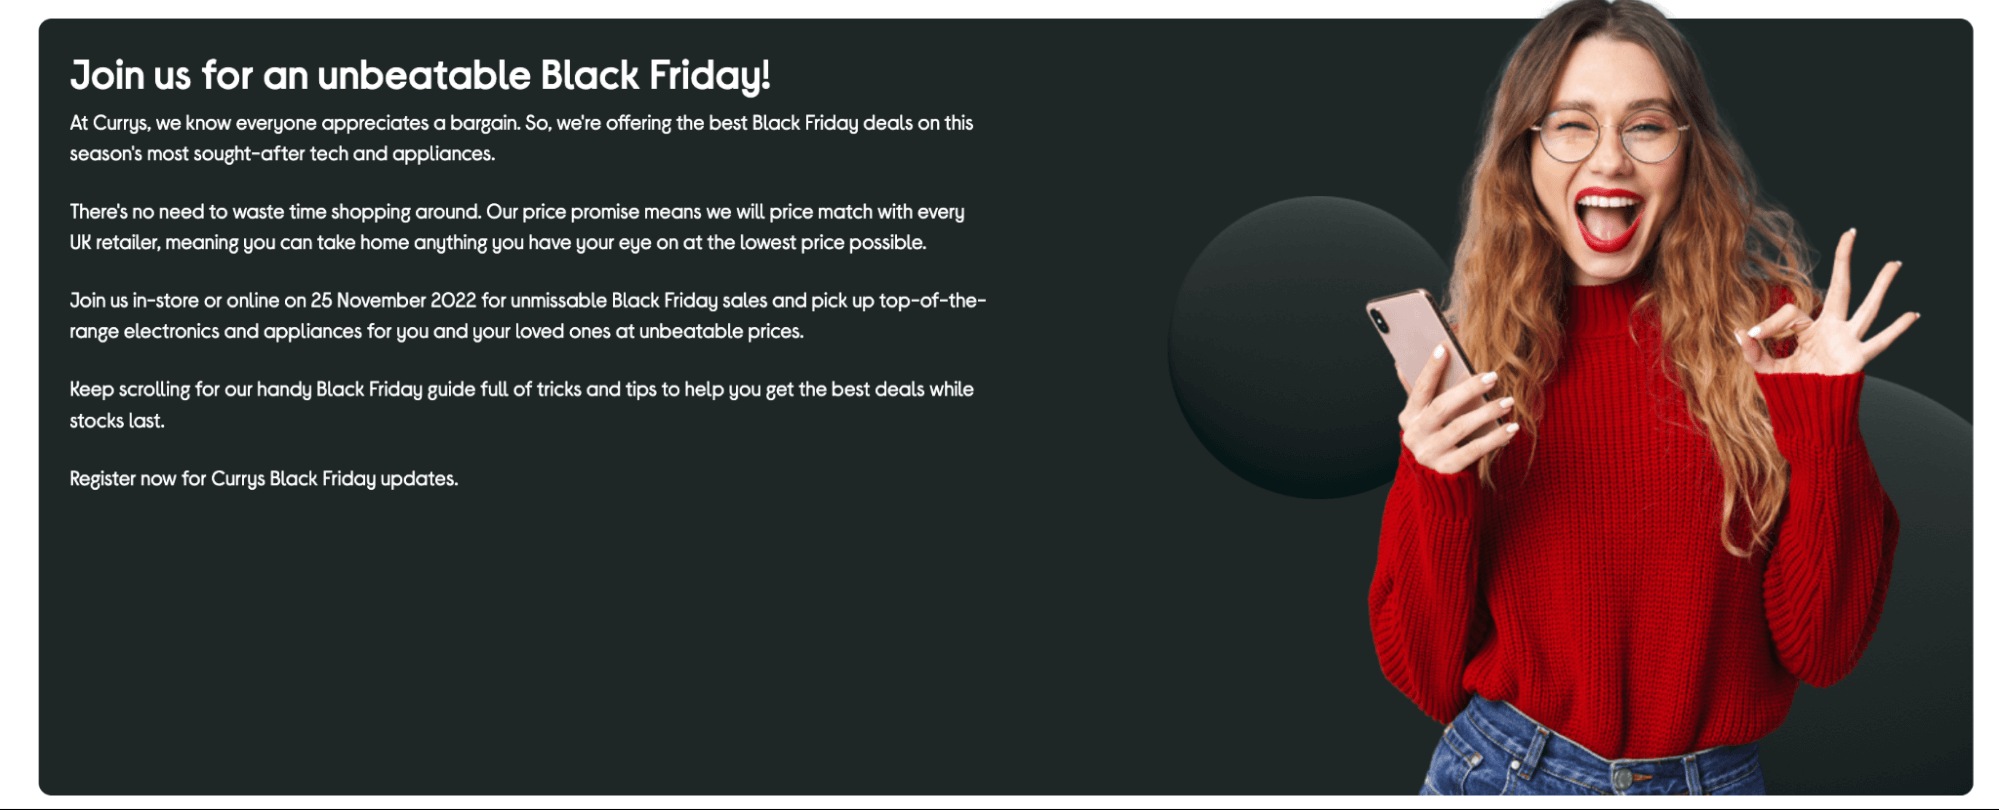 Currys Black Friday sales page